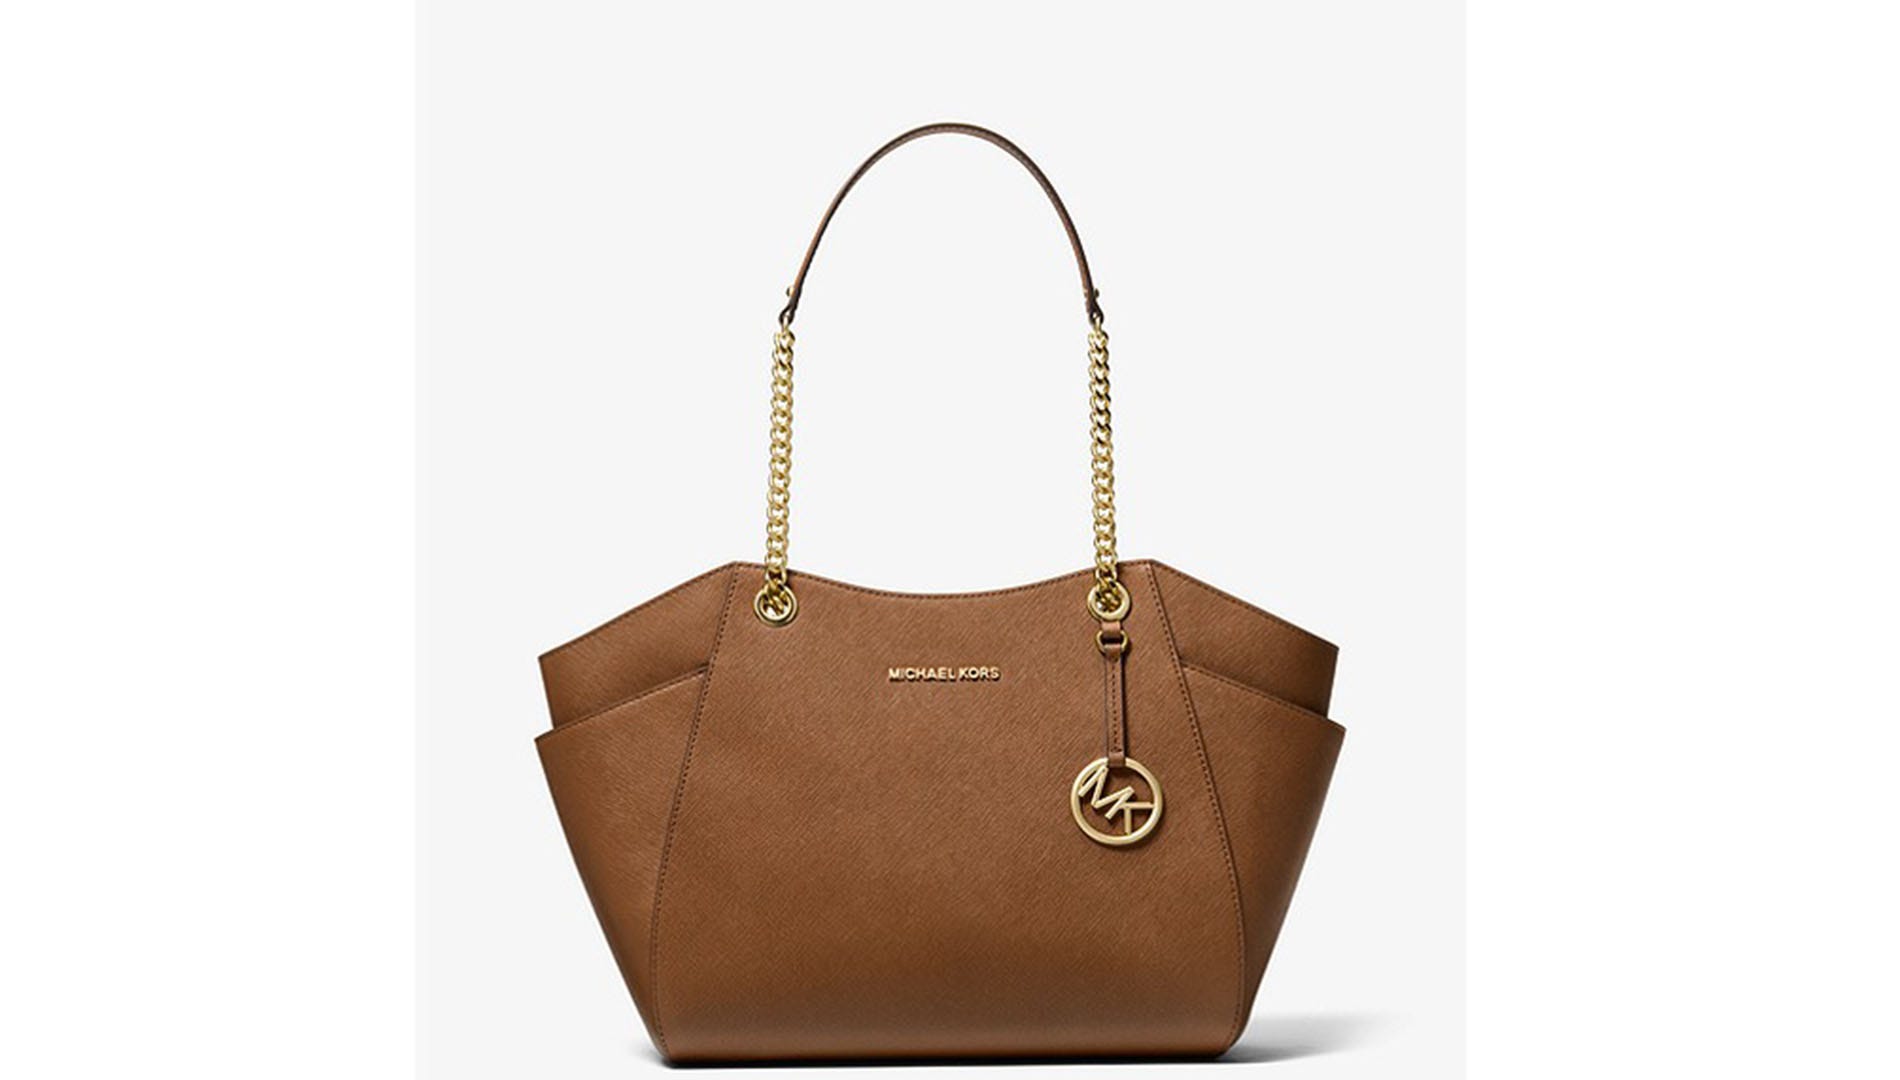 Michael Kors sale: It's the last day to 